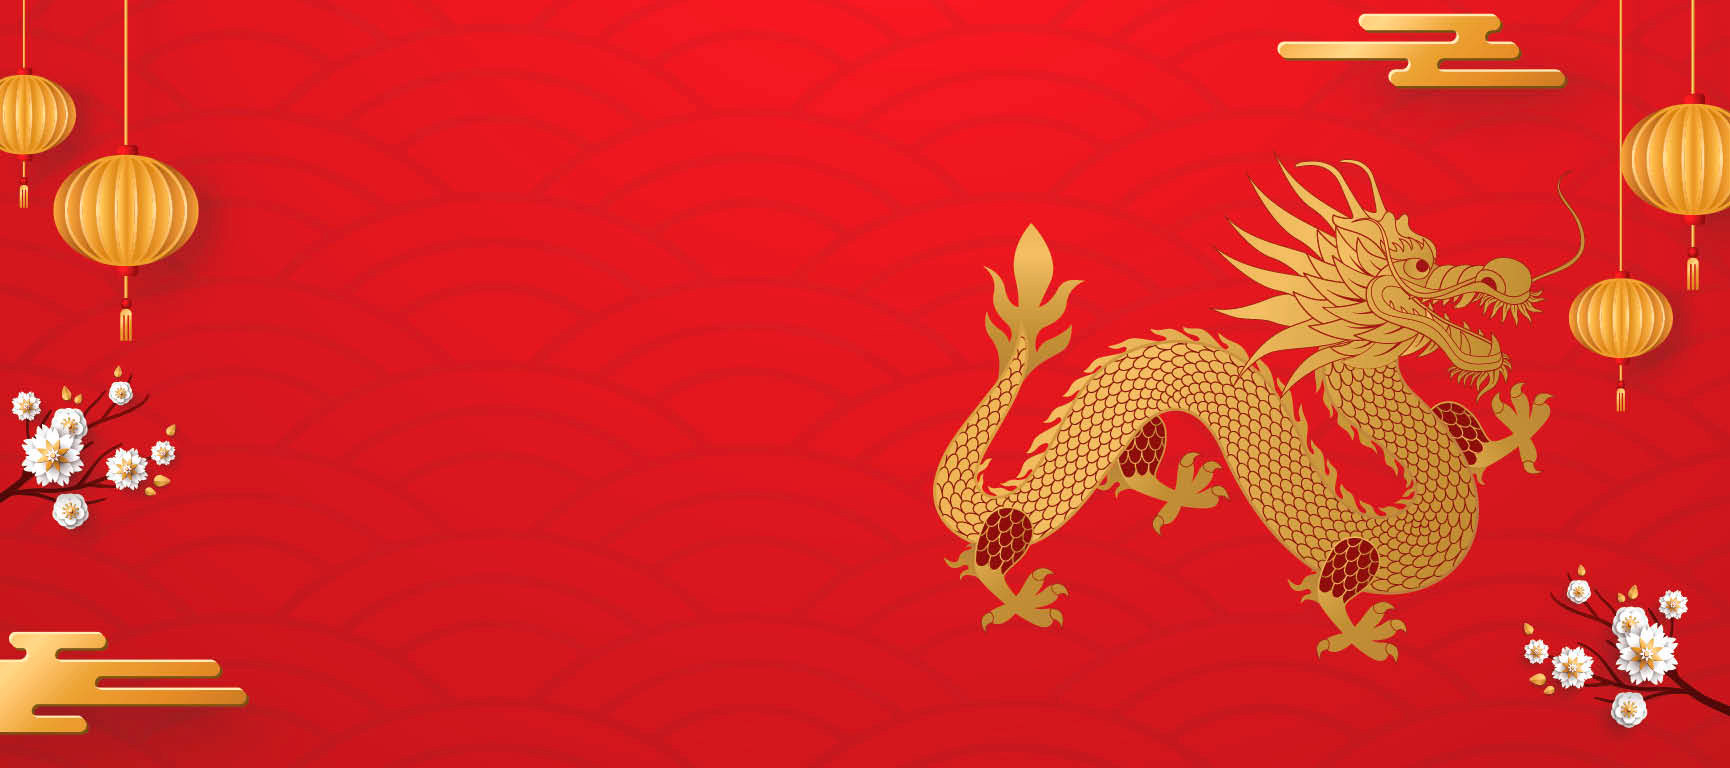 golden dragon on red background